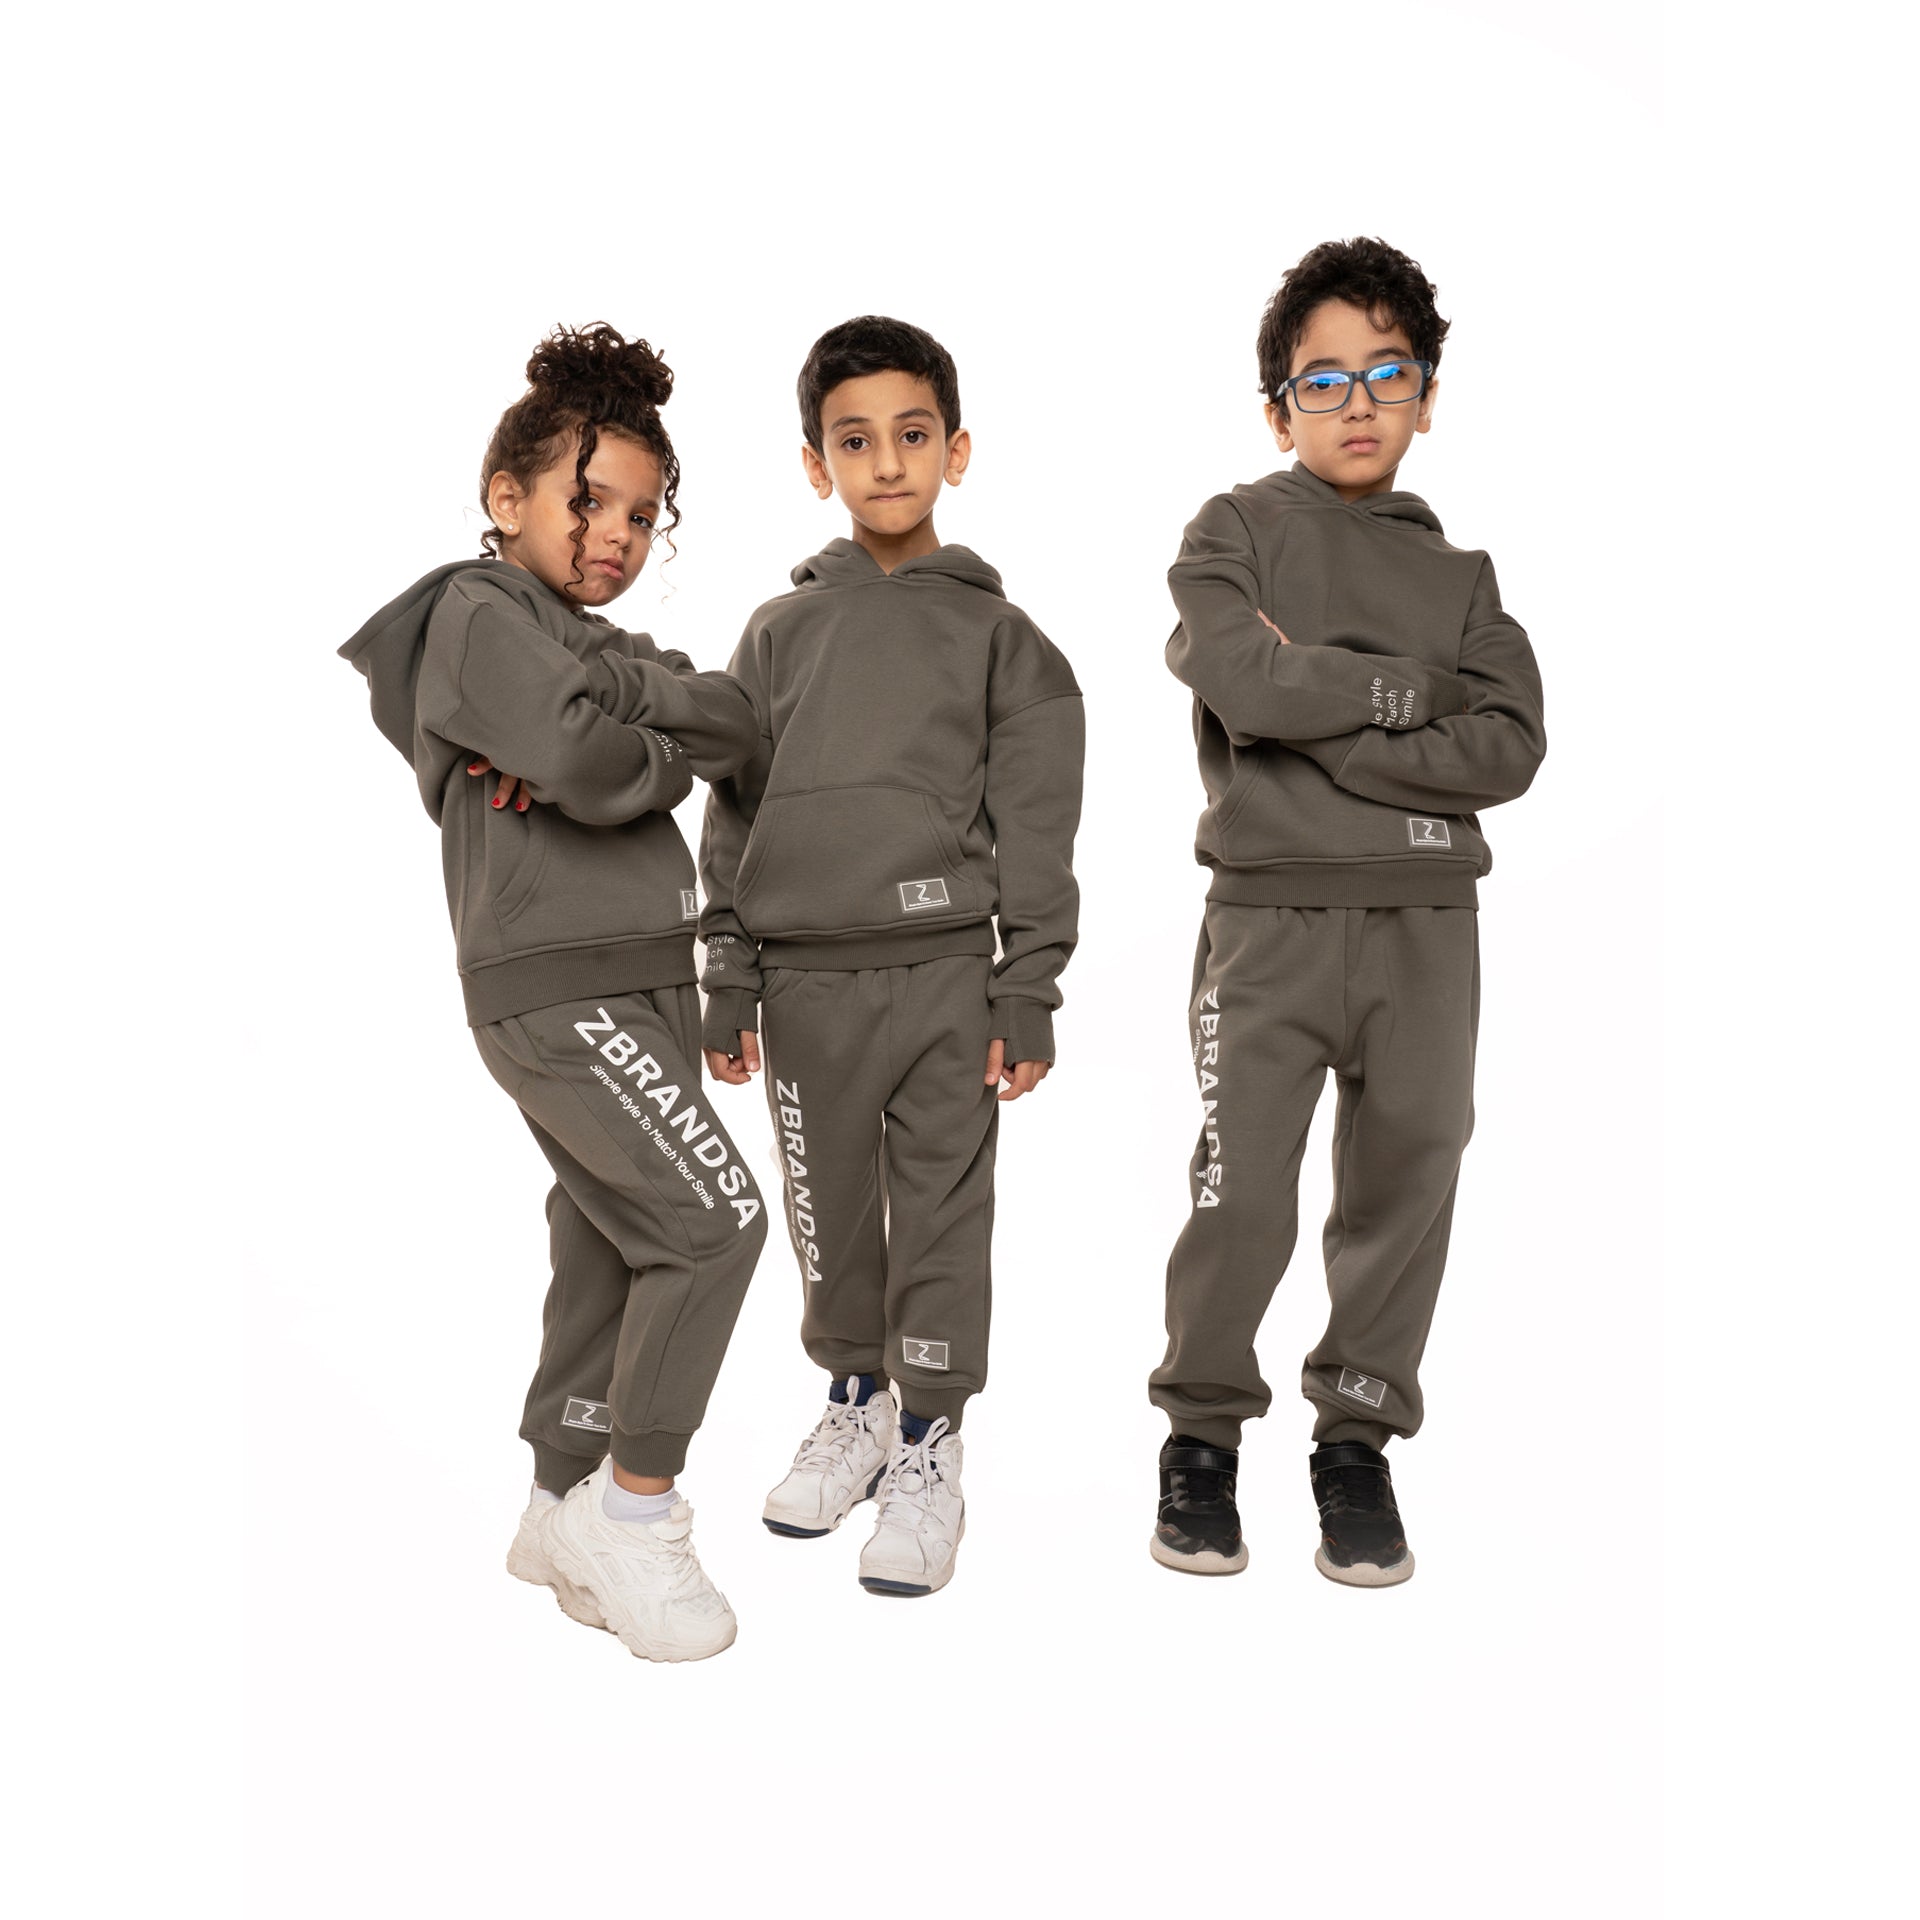 kids¬†set Gray hoodie and pants From Z Brand